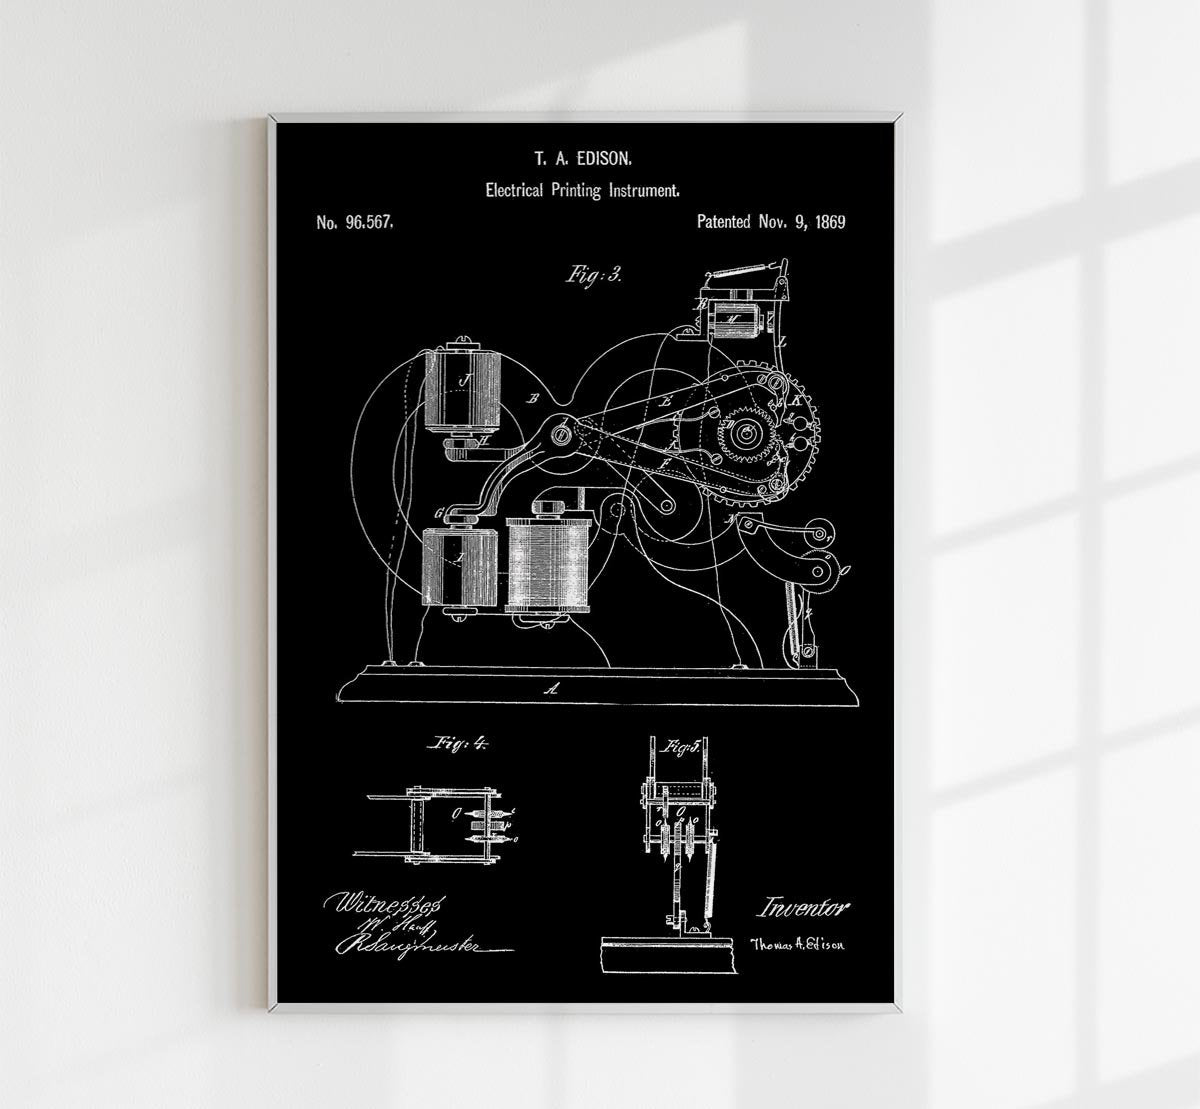 Electrical Printing Instrument Patent Poster